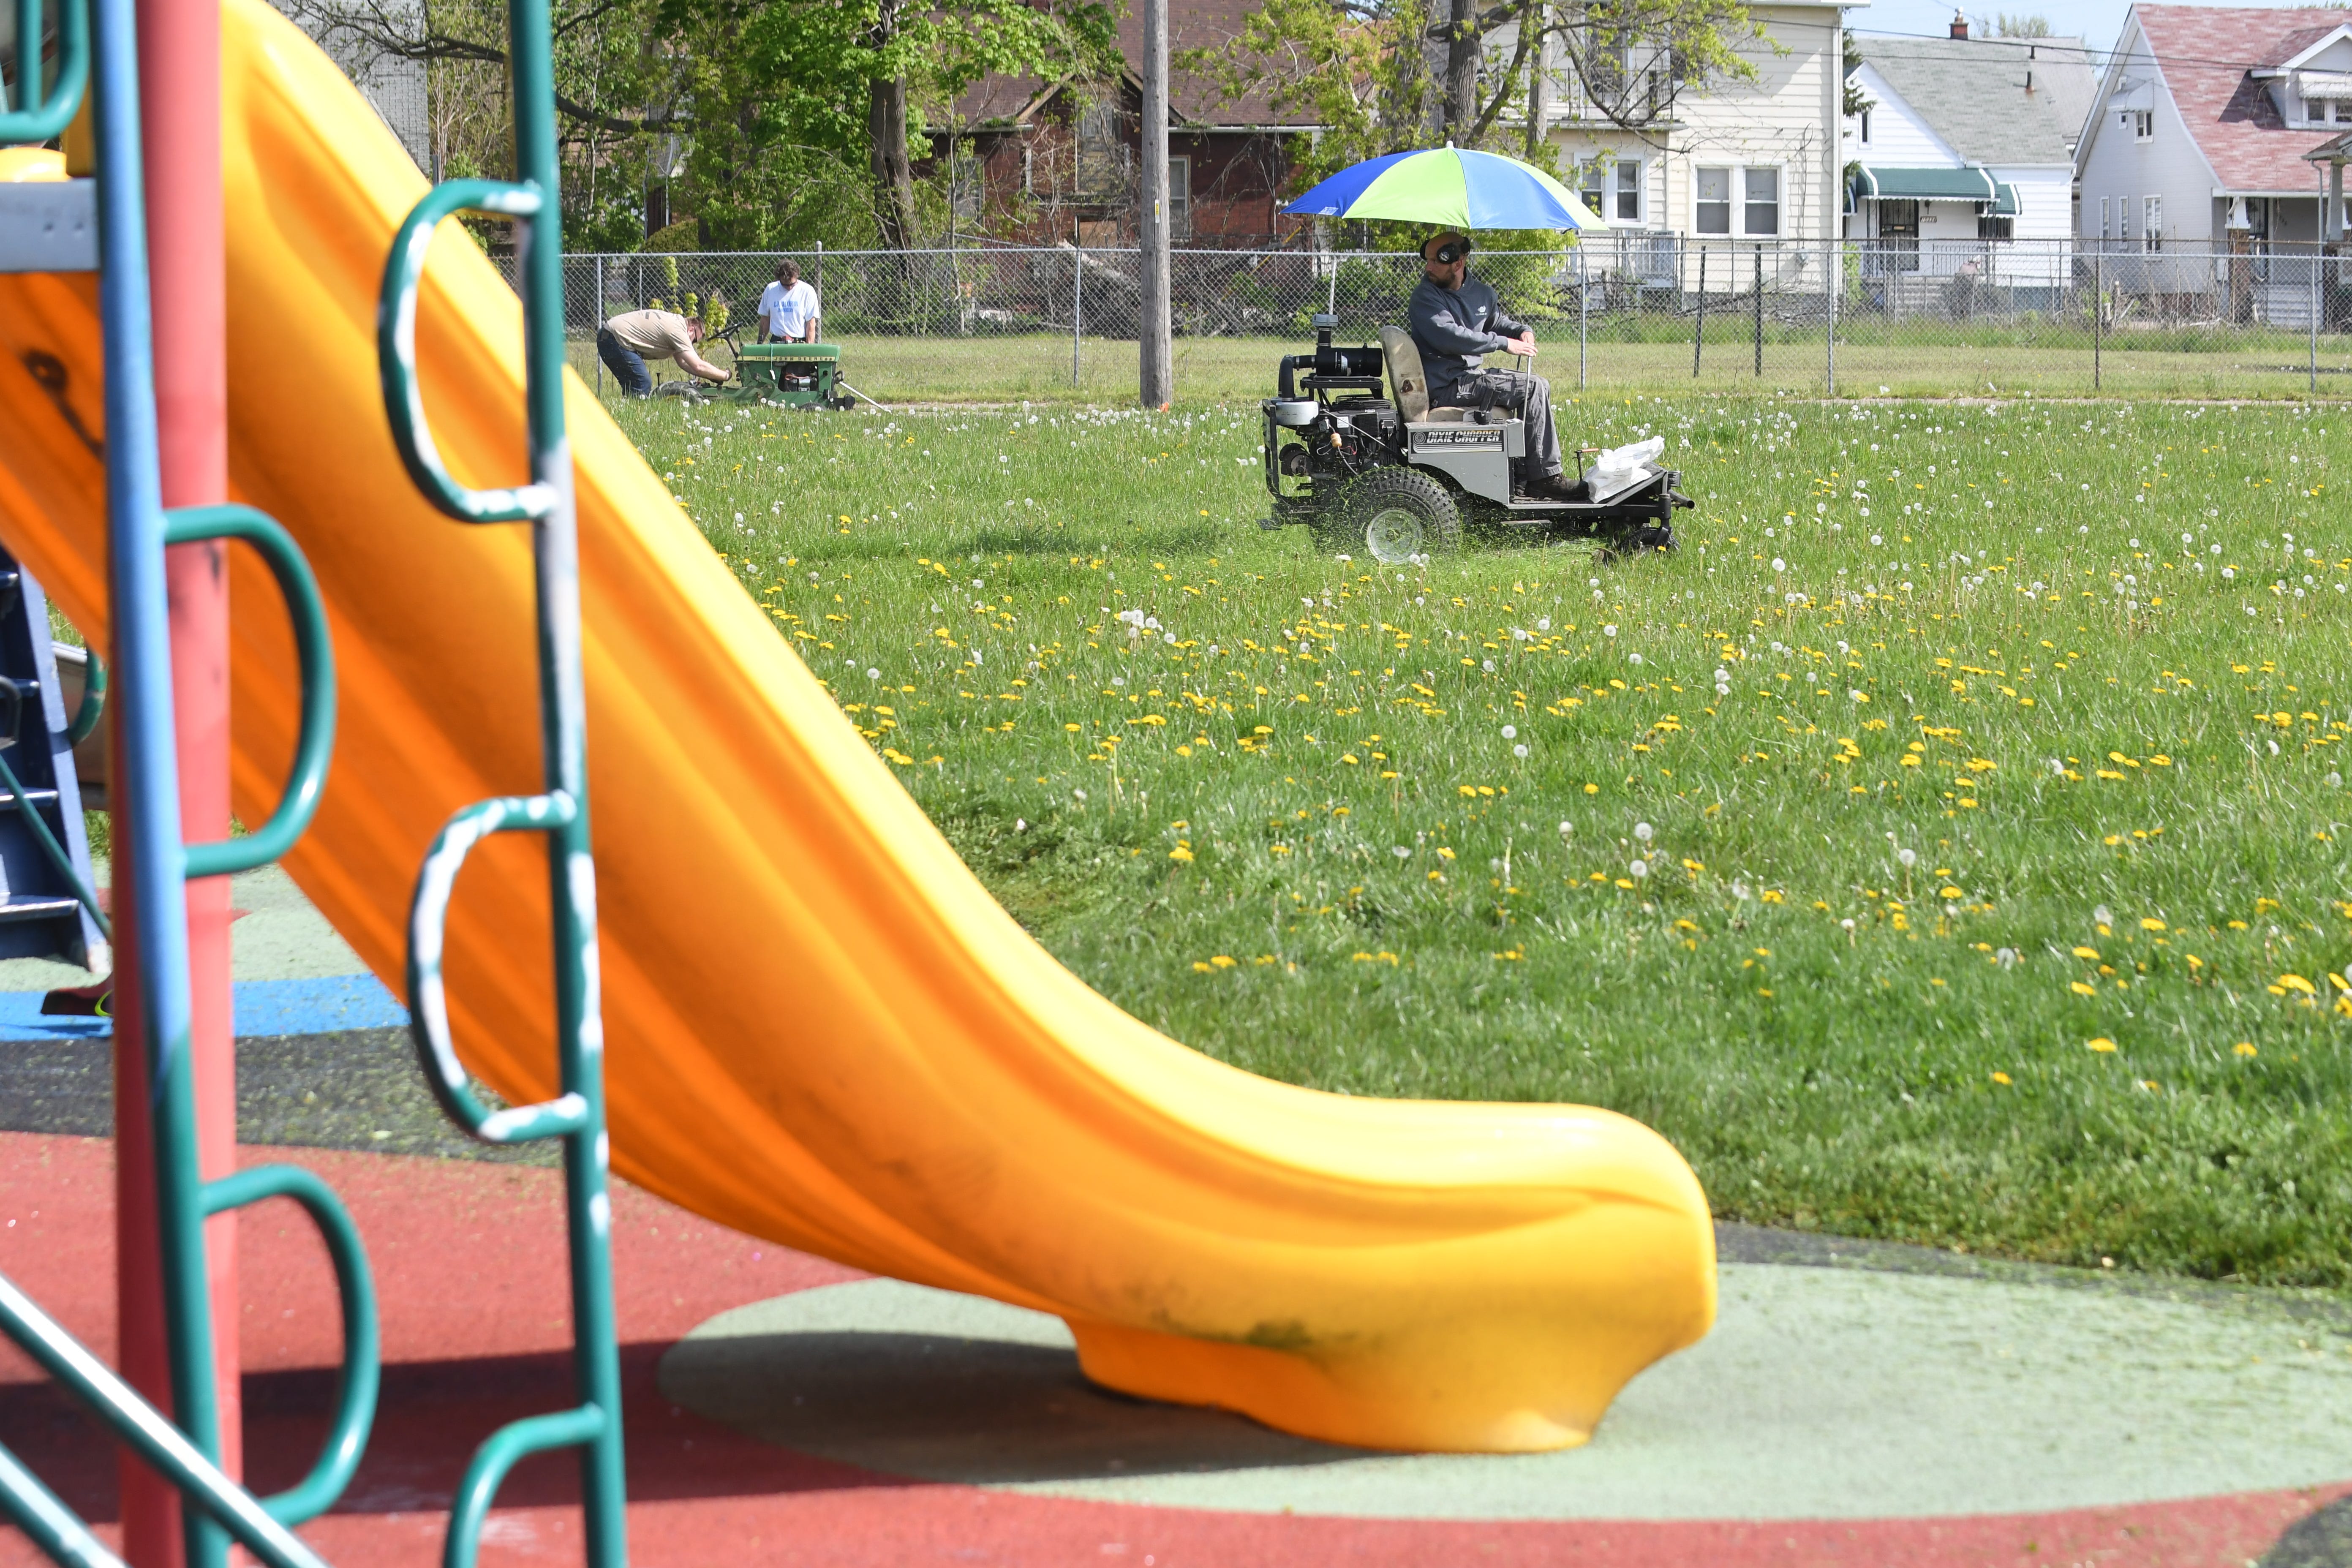 A member of the Detroit Mower Gang starts the 2020 Motown Mowdown near the playscape at Hammerberg Playfield.